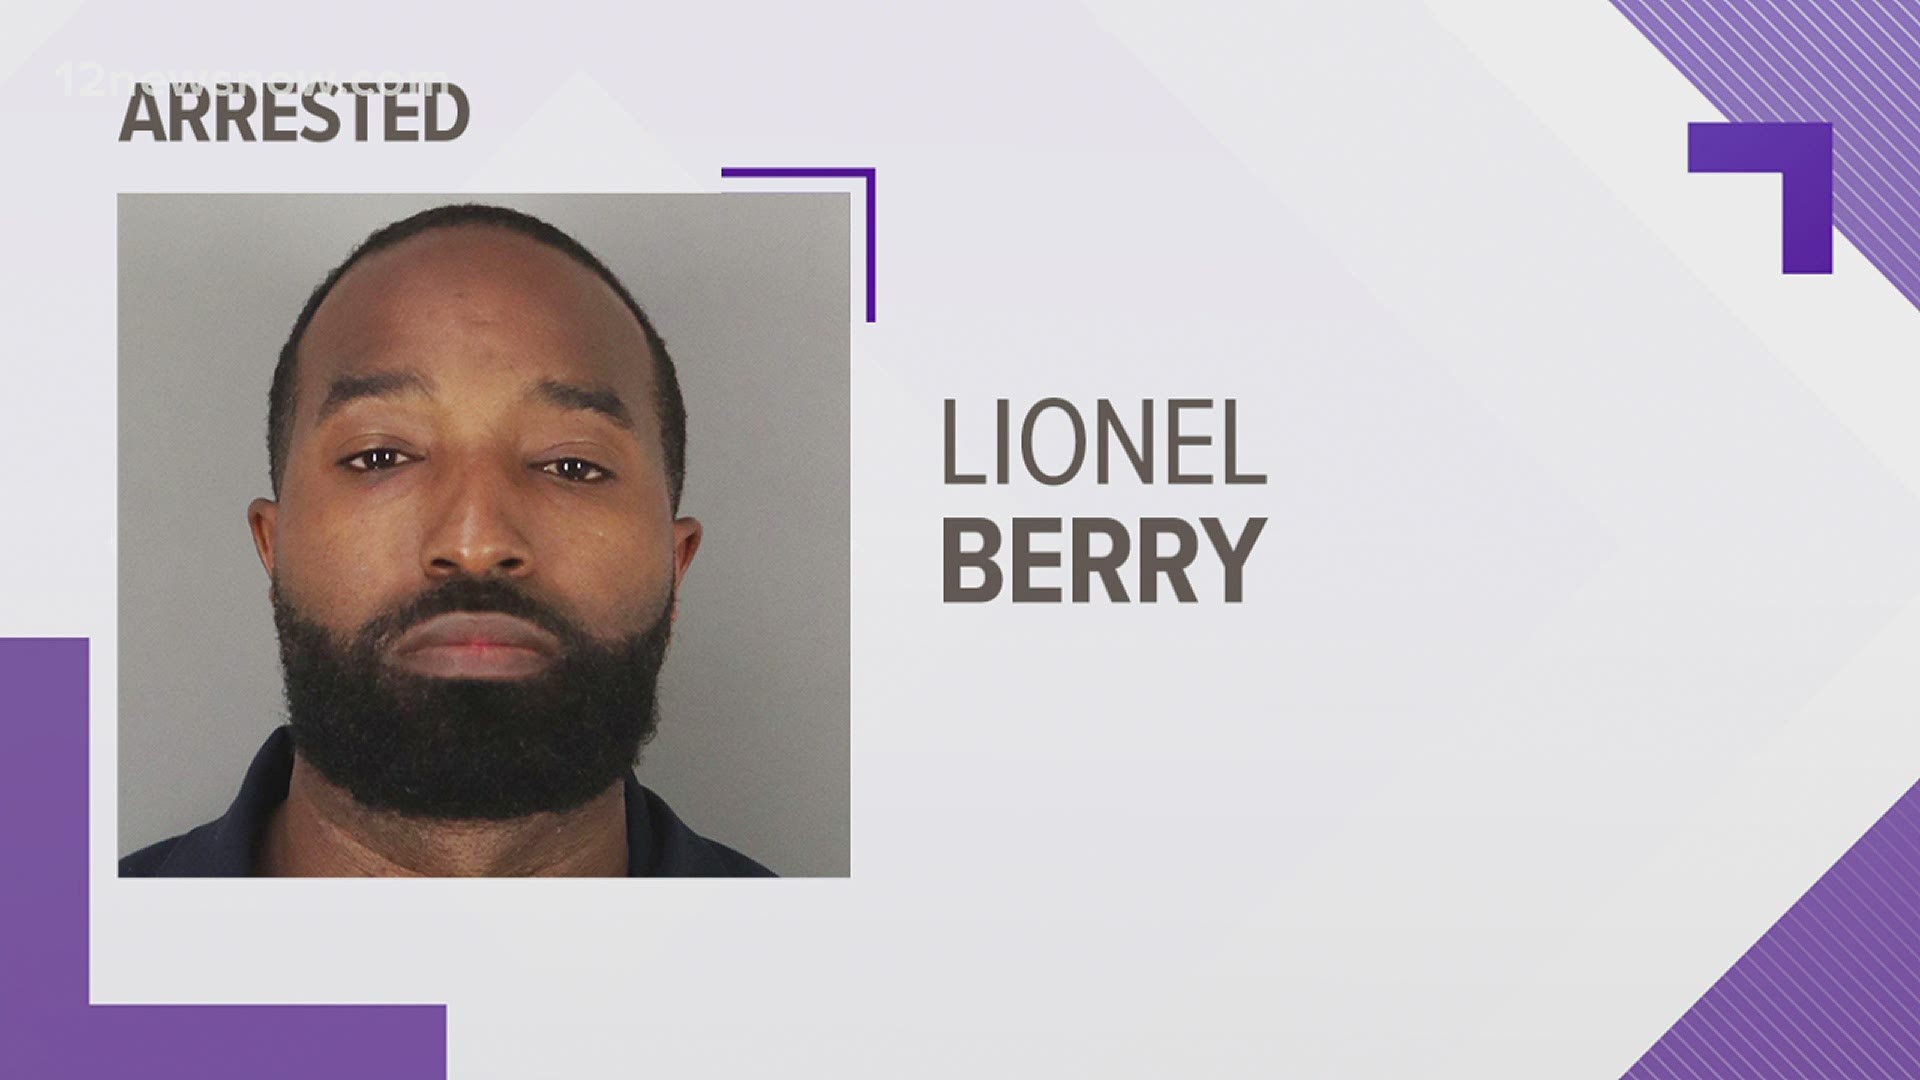 The arrest involving officer Lionel Berry, 35, is under investigation, officer Cody Guedry confirmed with 12News.